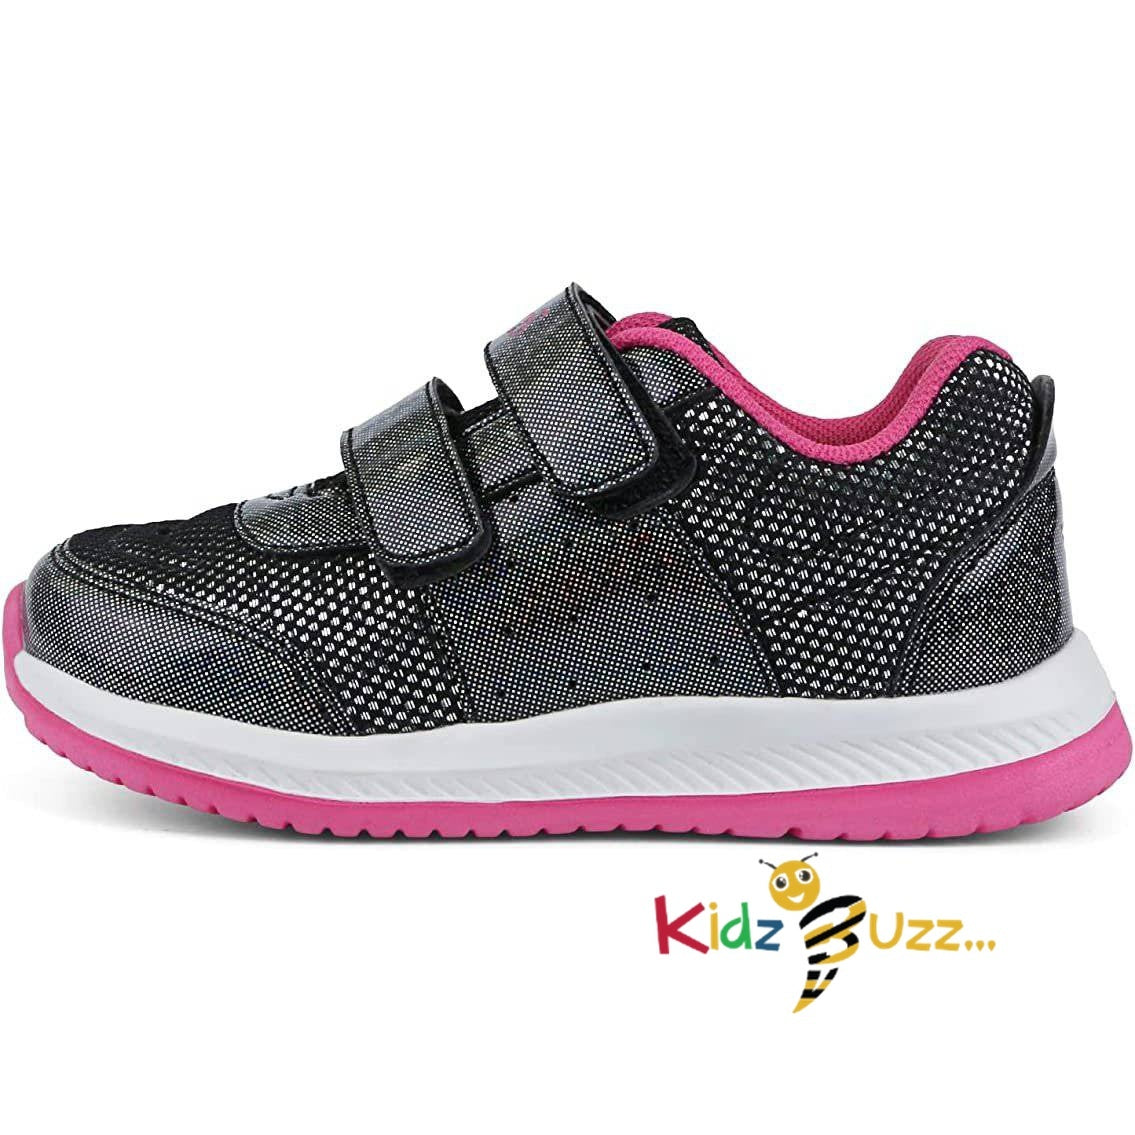 Toddler Girls Trainers Black Rose Sizes Available